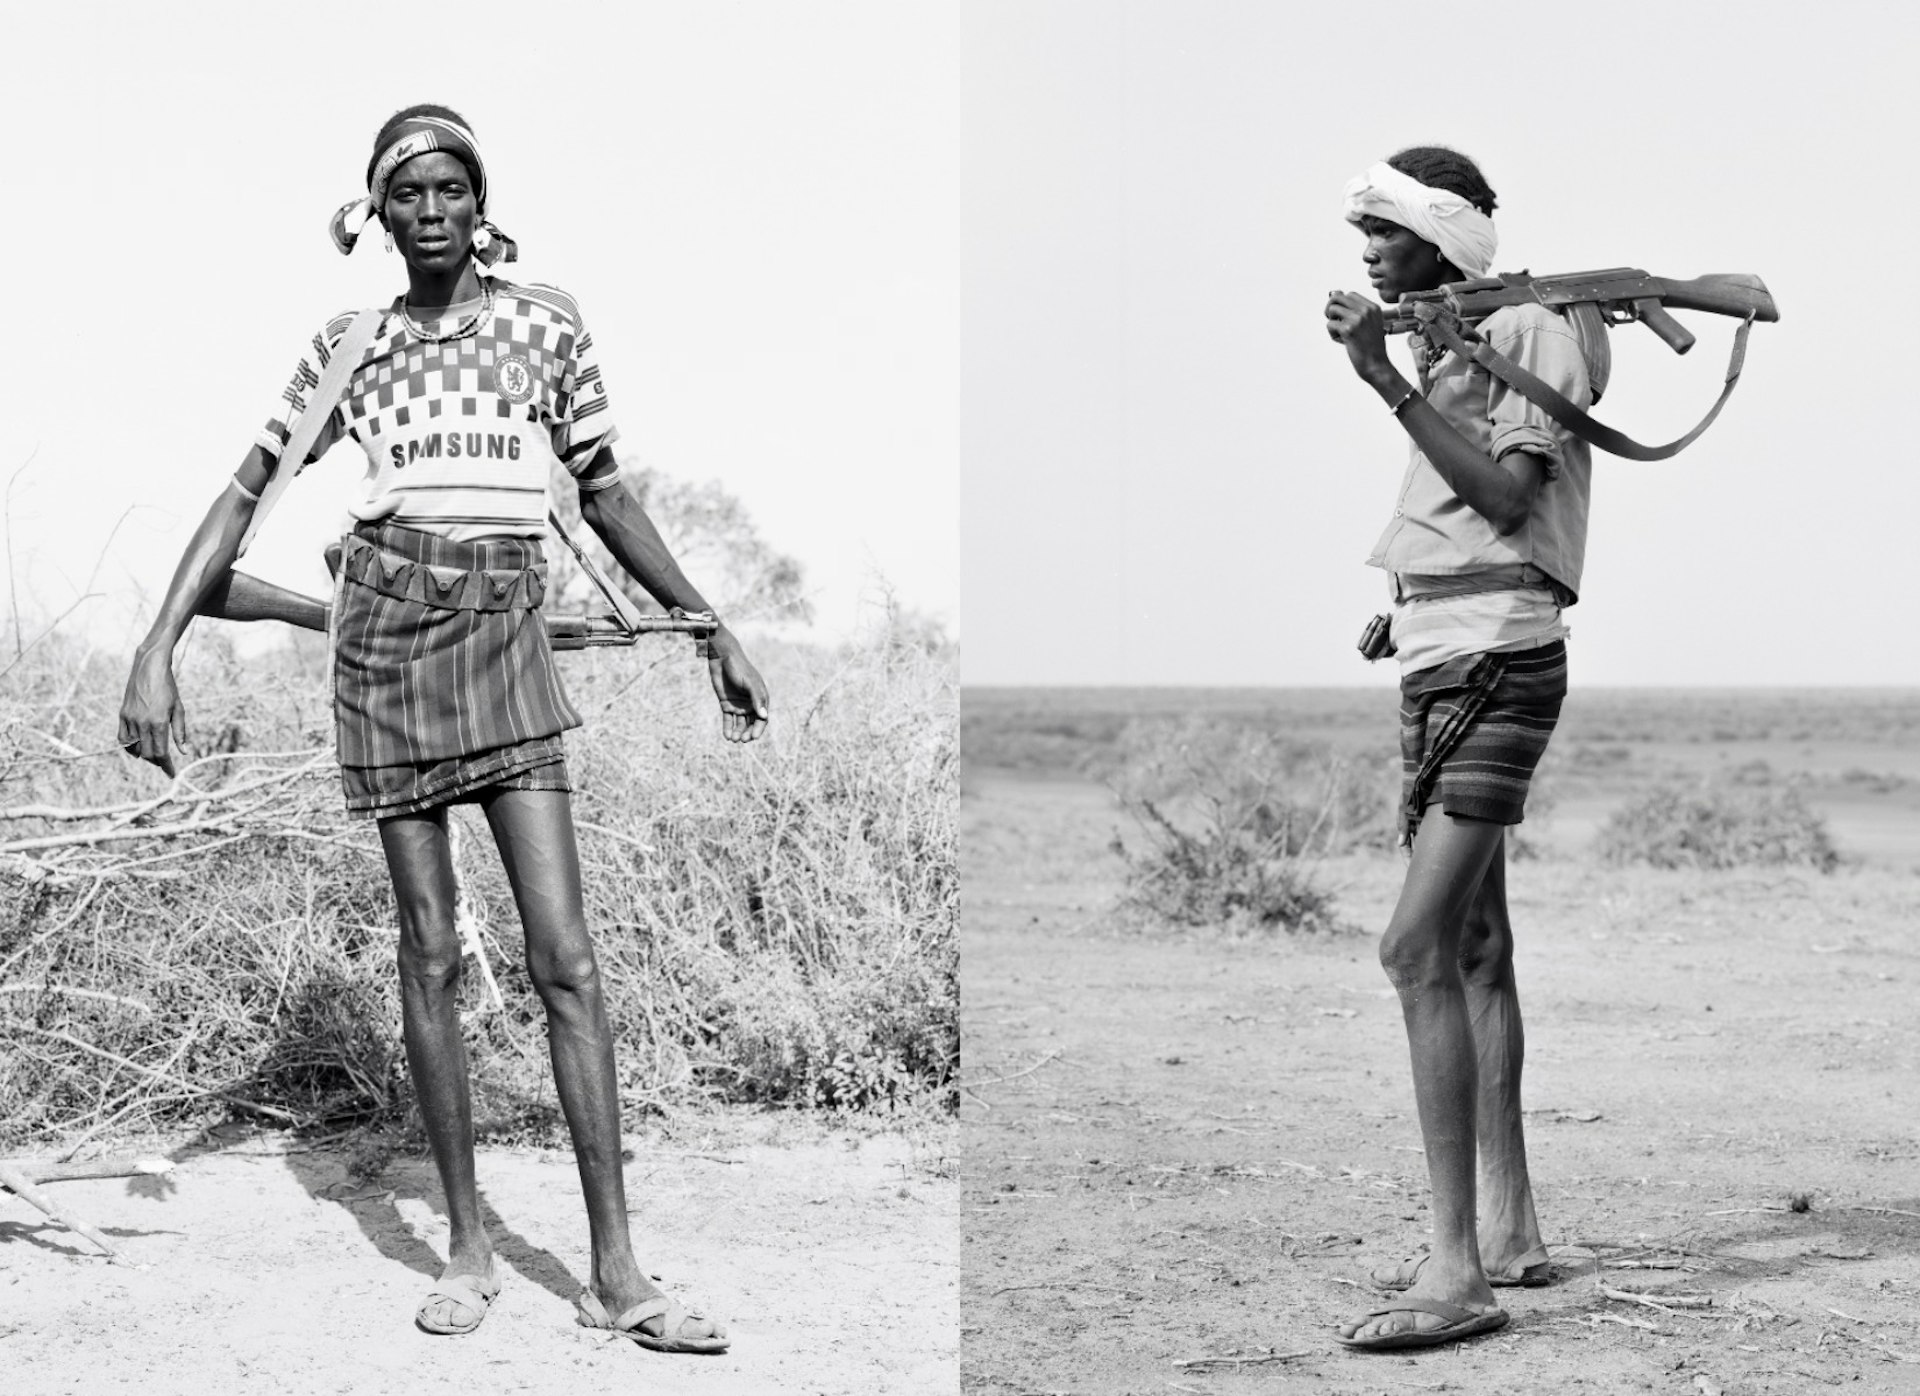 Black and white portraits of Africa's nomadic outsiders